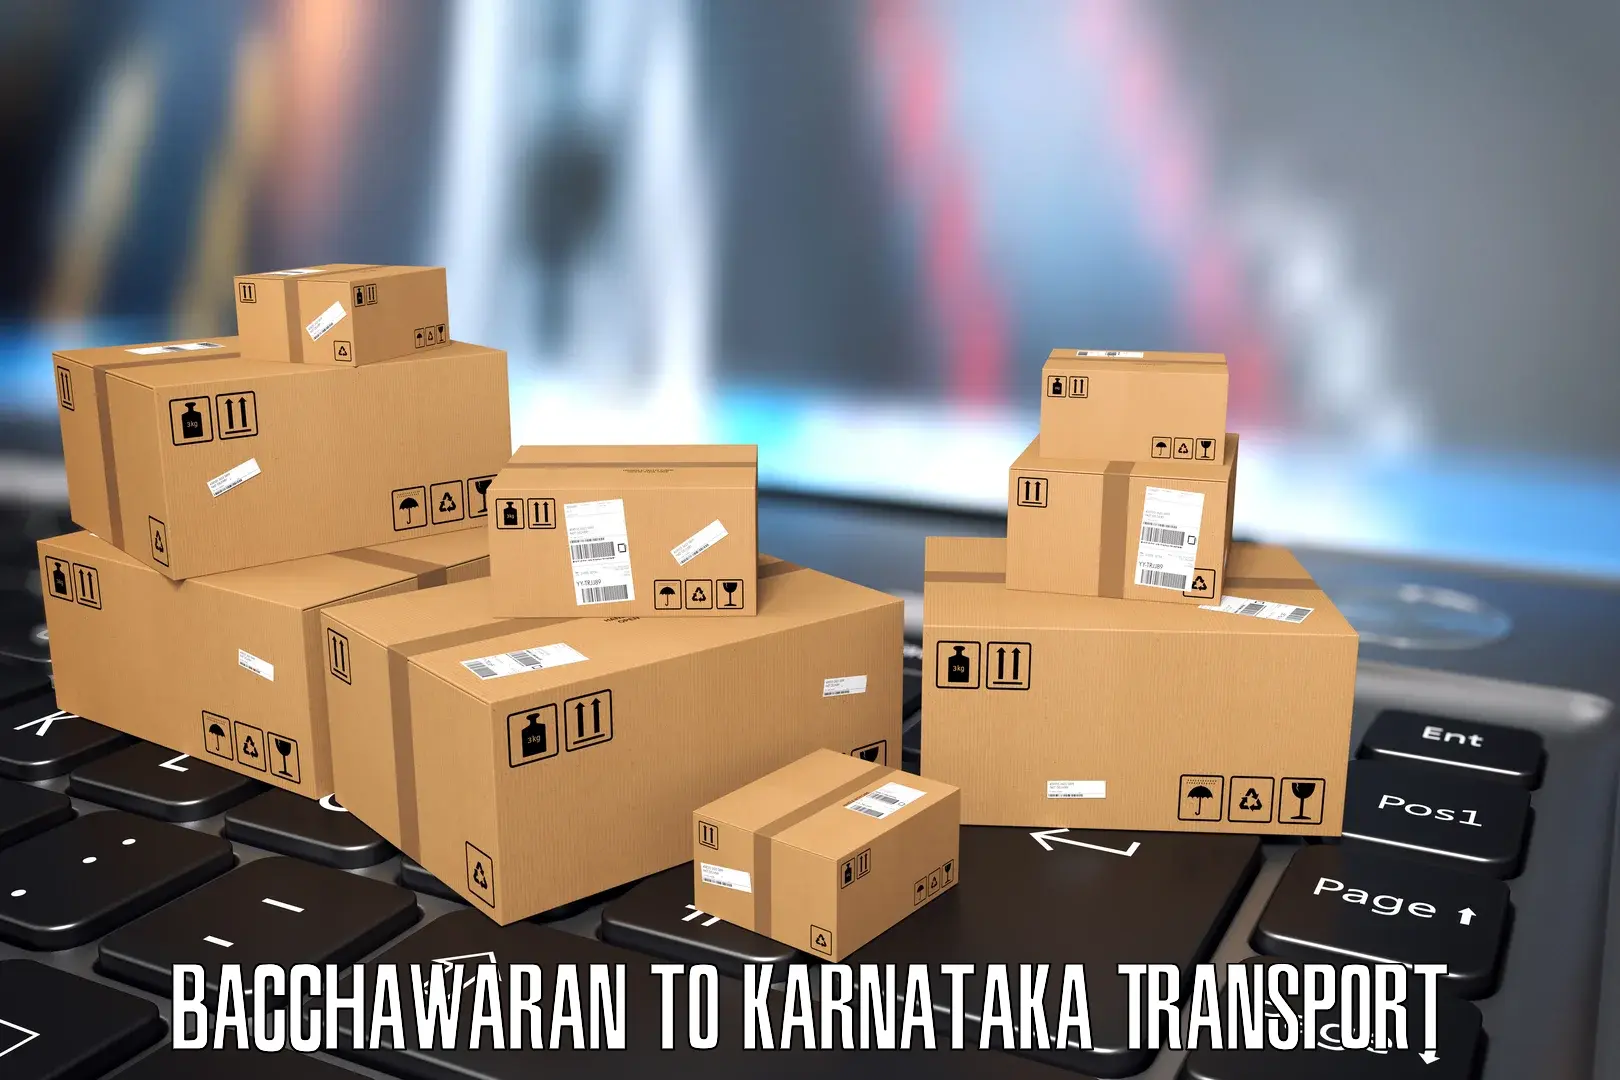 Transport shared services in Bacchawaran to Bangalore